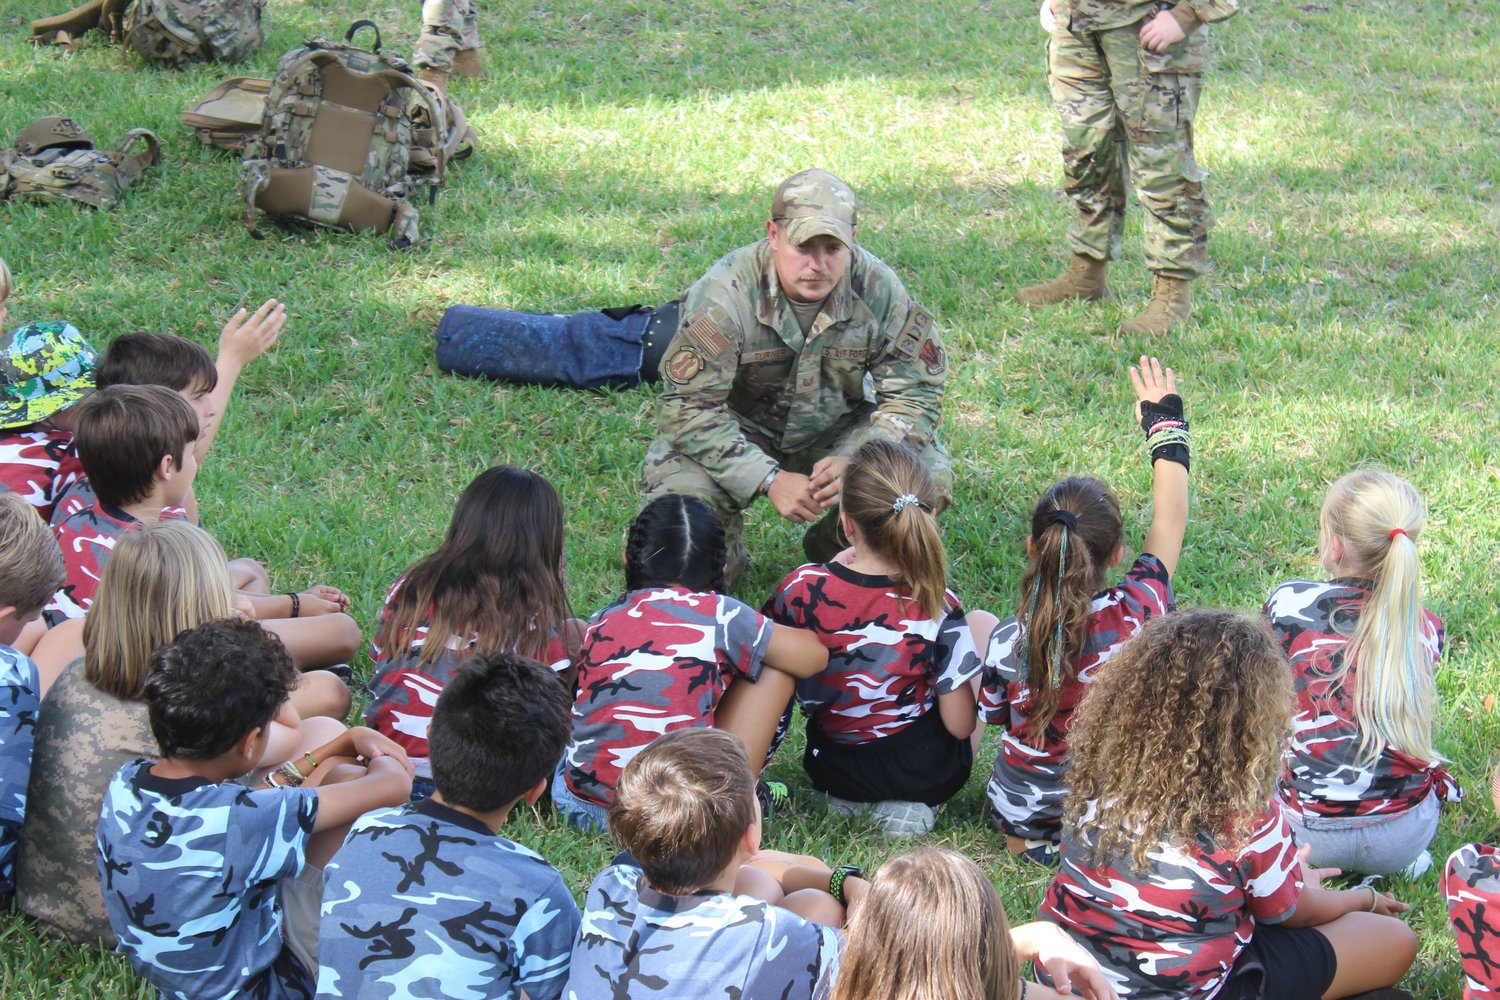 Technical Sgt. Turner of the U.S. Air Force answers students’ questions during The Bolles Lower School Ponte Vedra Beach Campus field day on May 6.